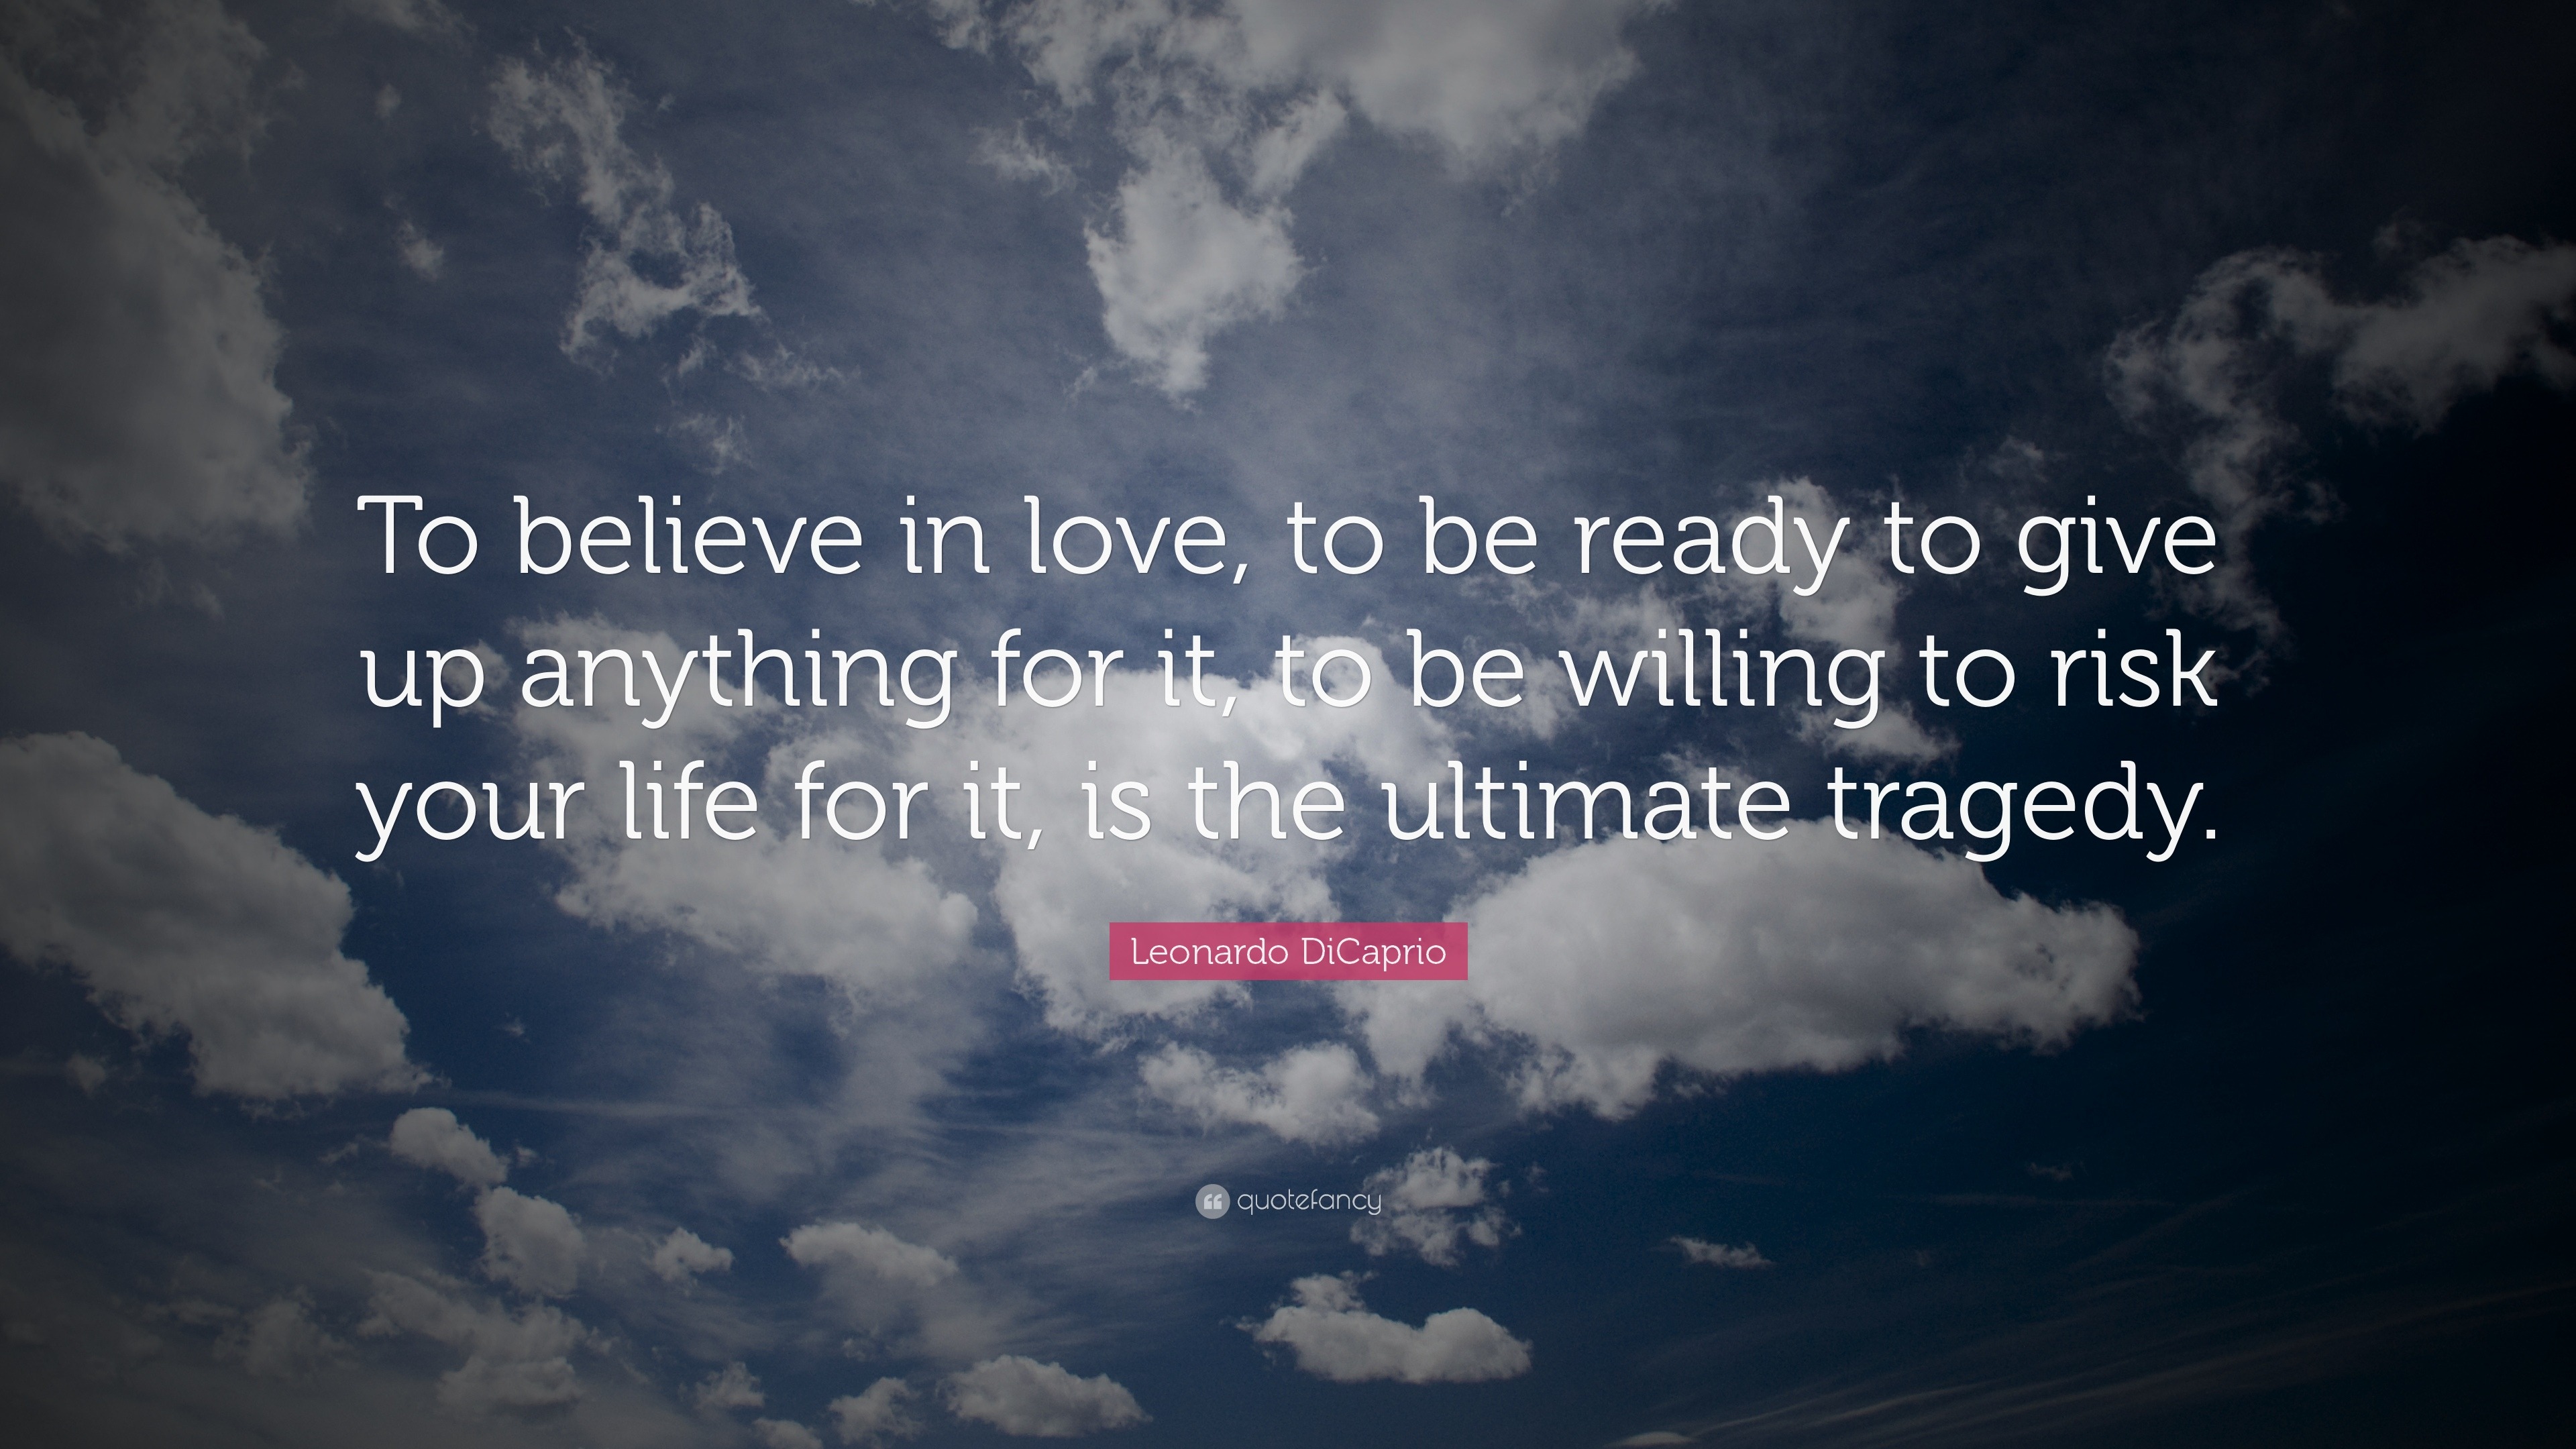 Leonardo DiCaprio Quote “To believe in love to be ready to give up